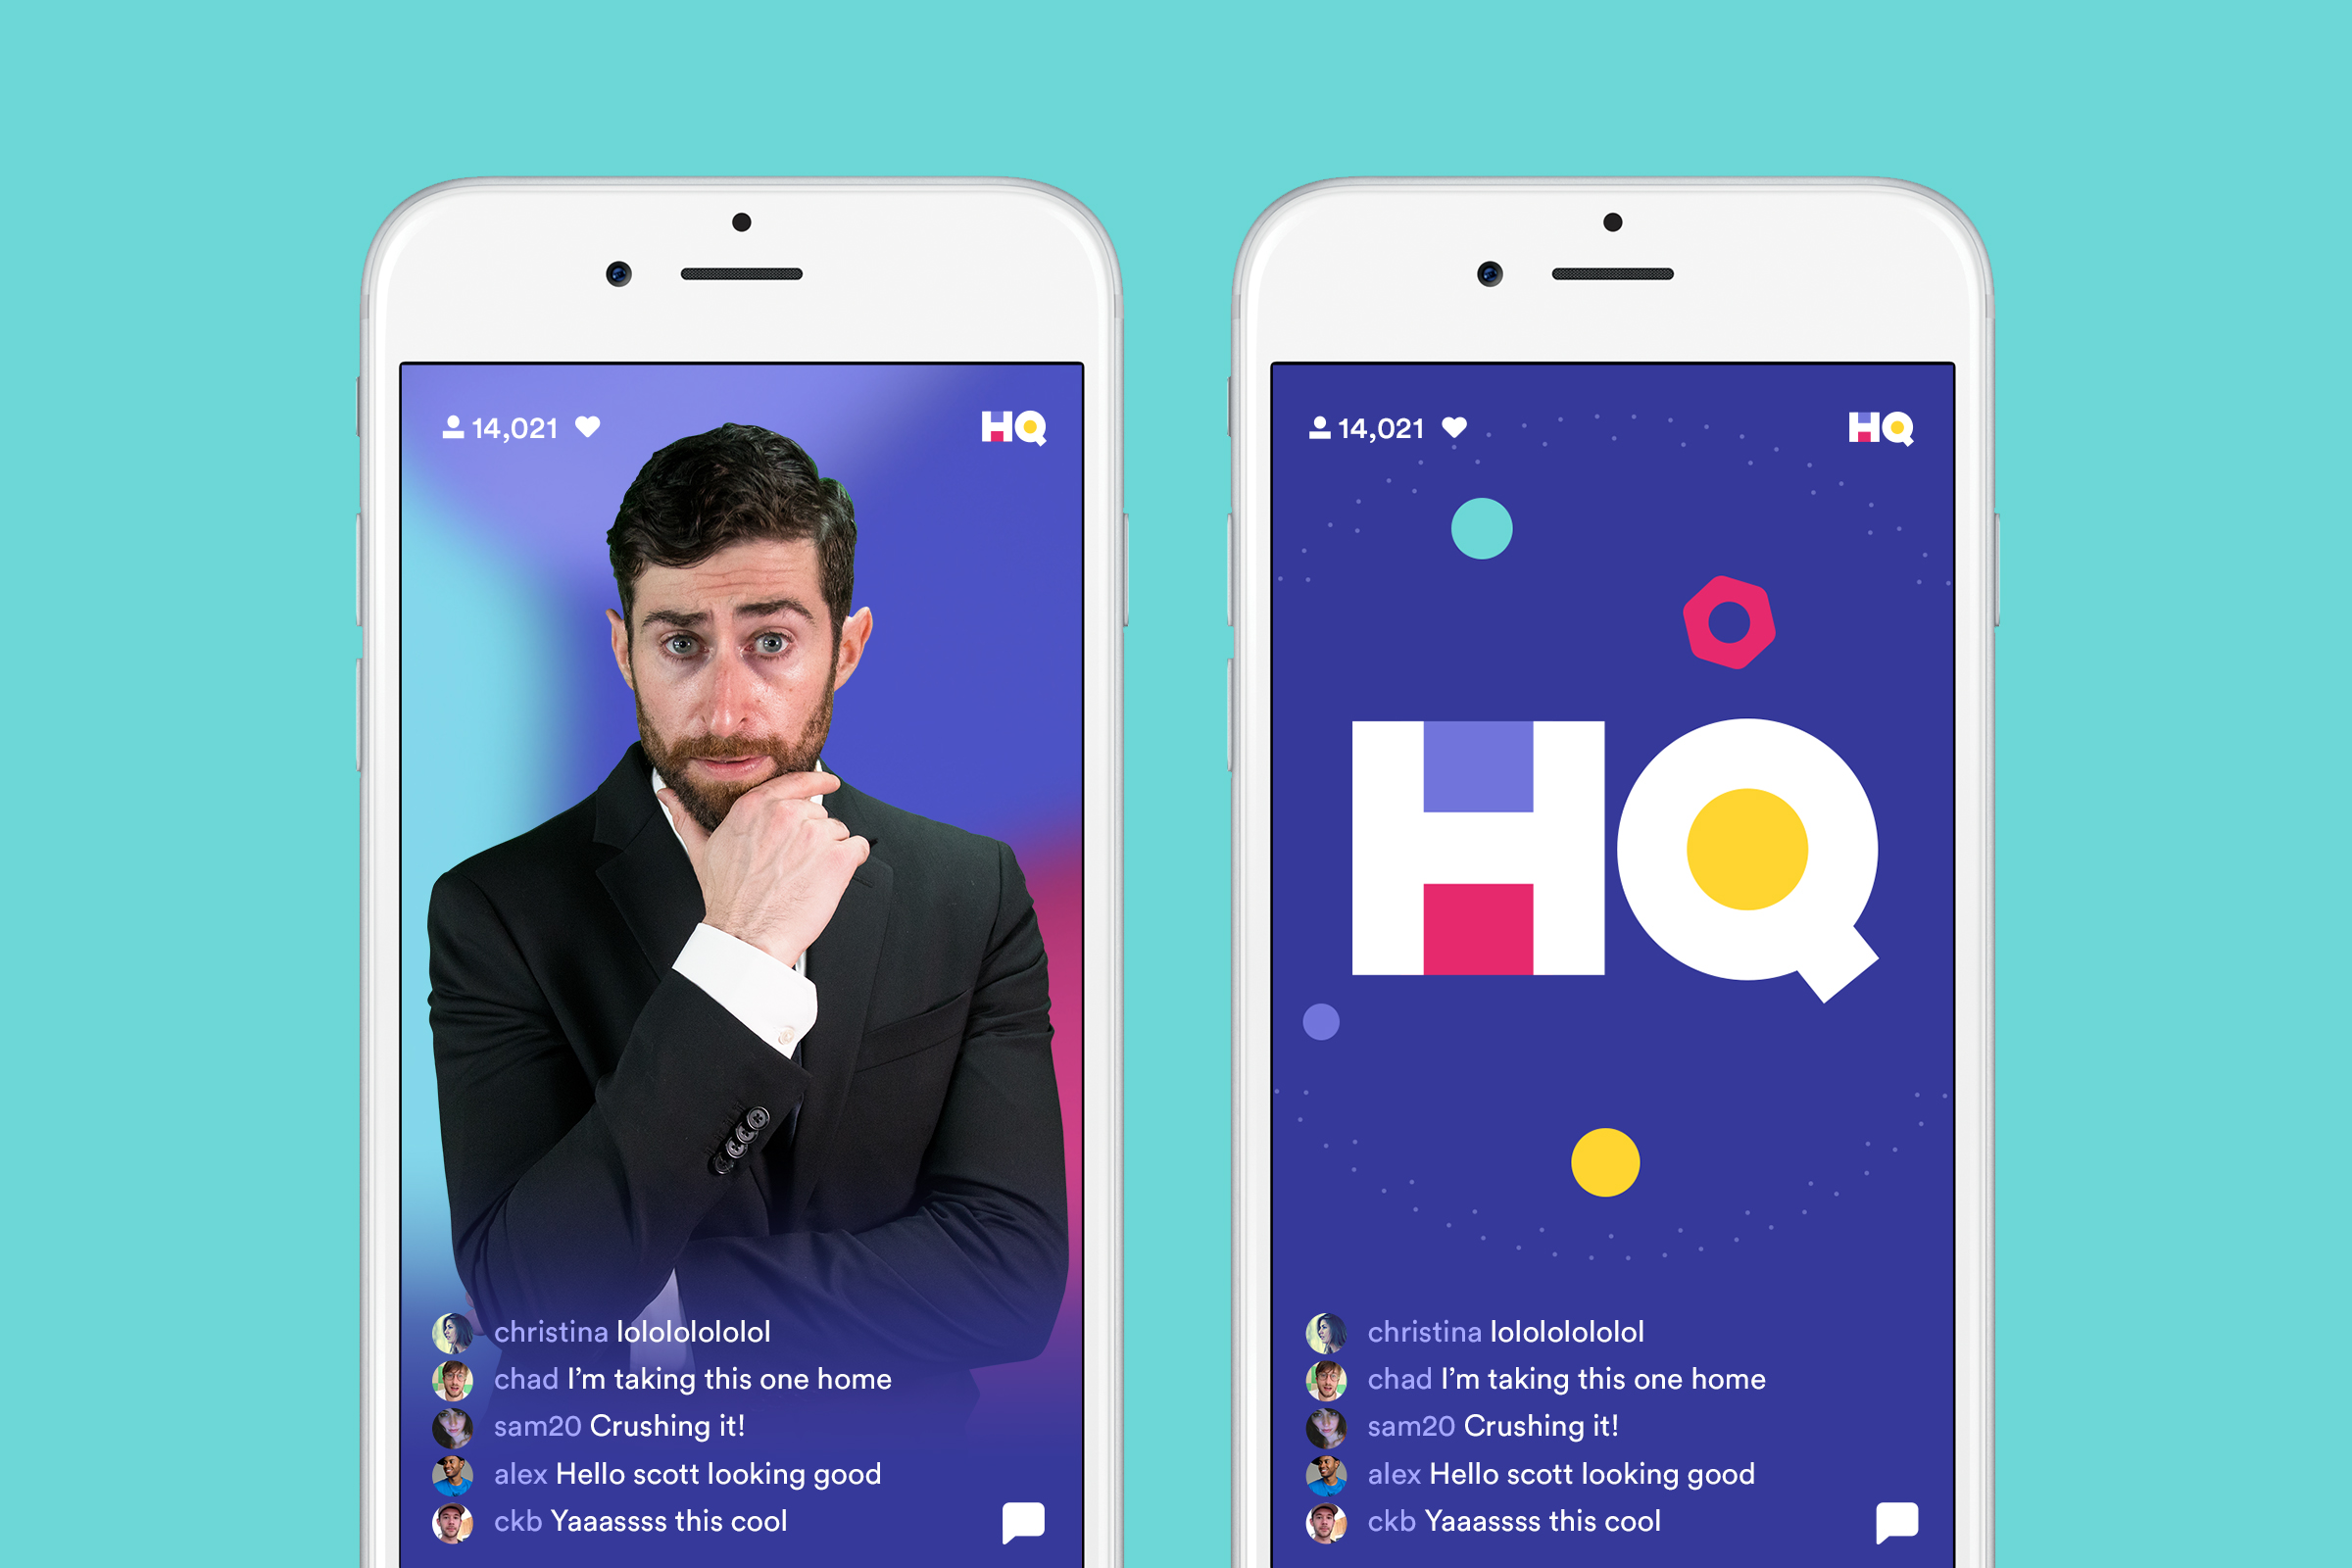 What Does HQ Stand For? The Trivia App's Founders Aren't Telling